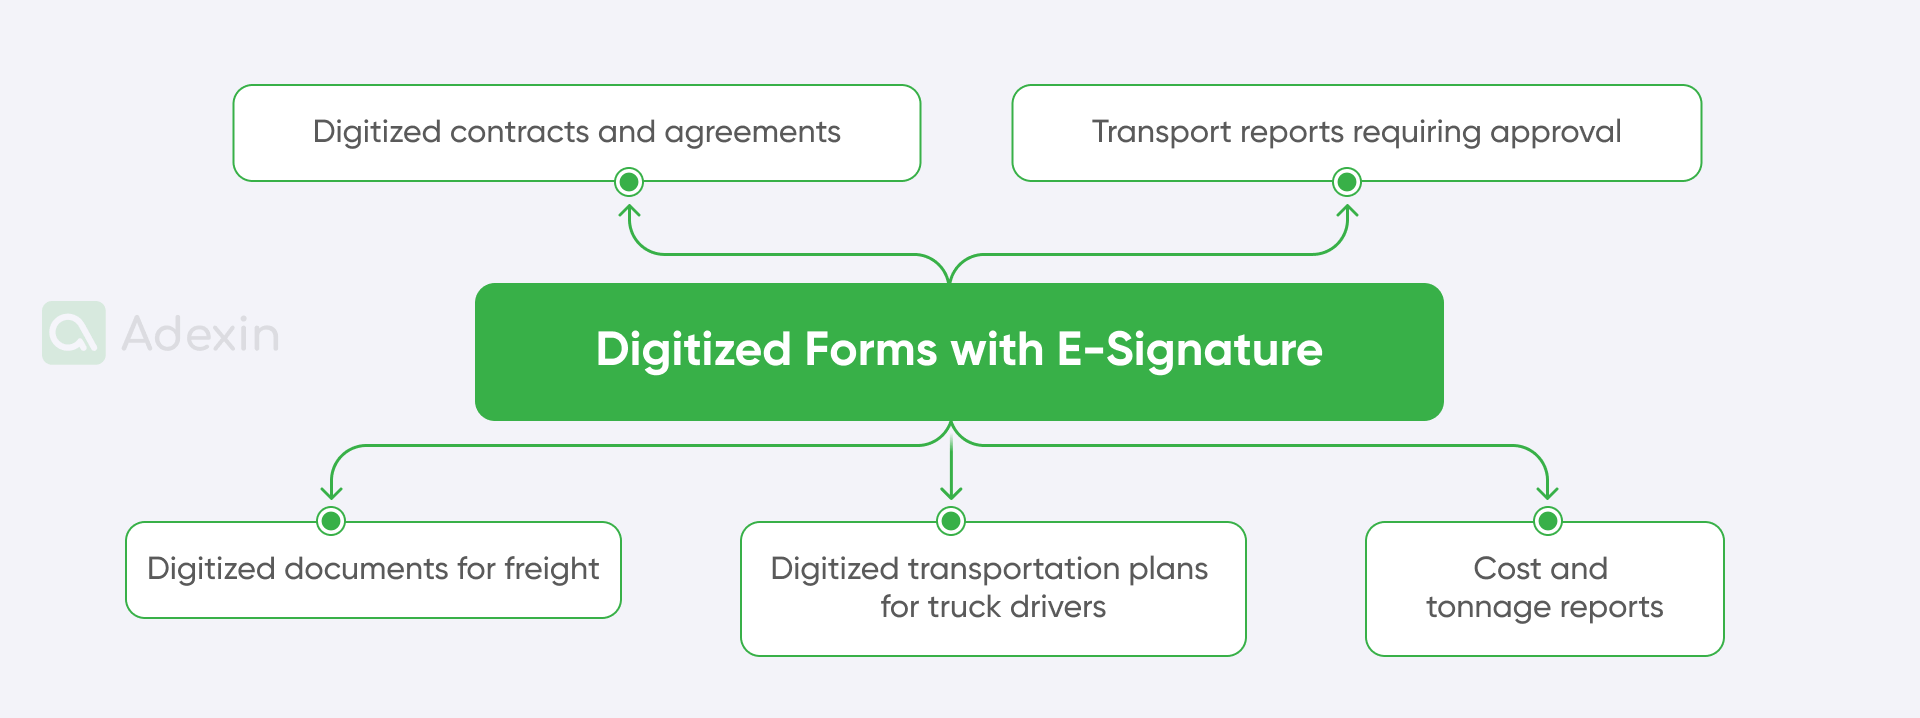 Digitized forms with e-signature